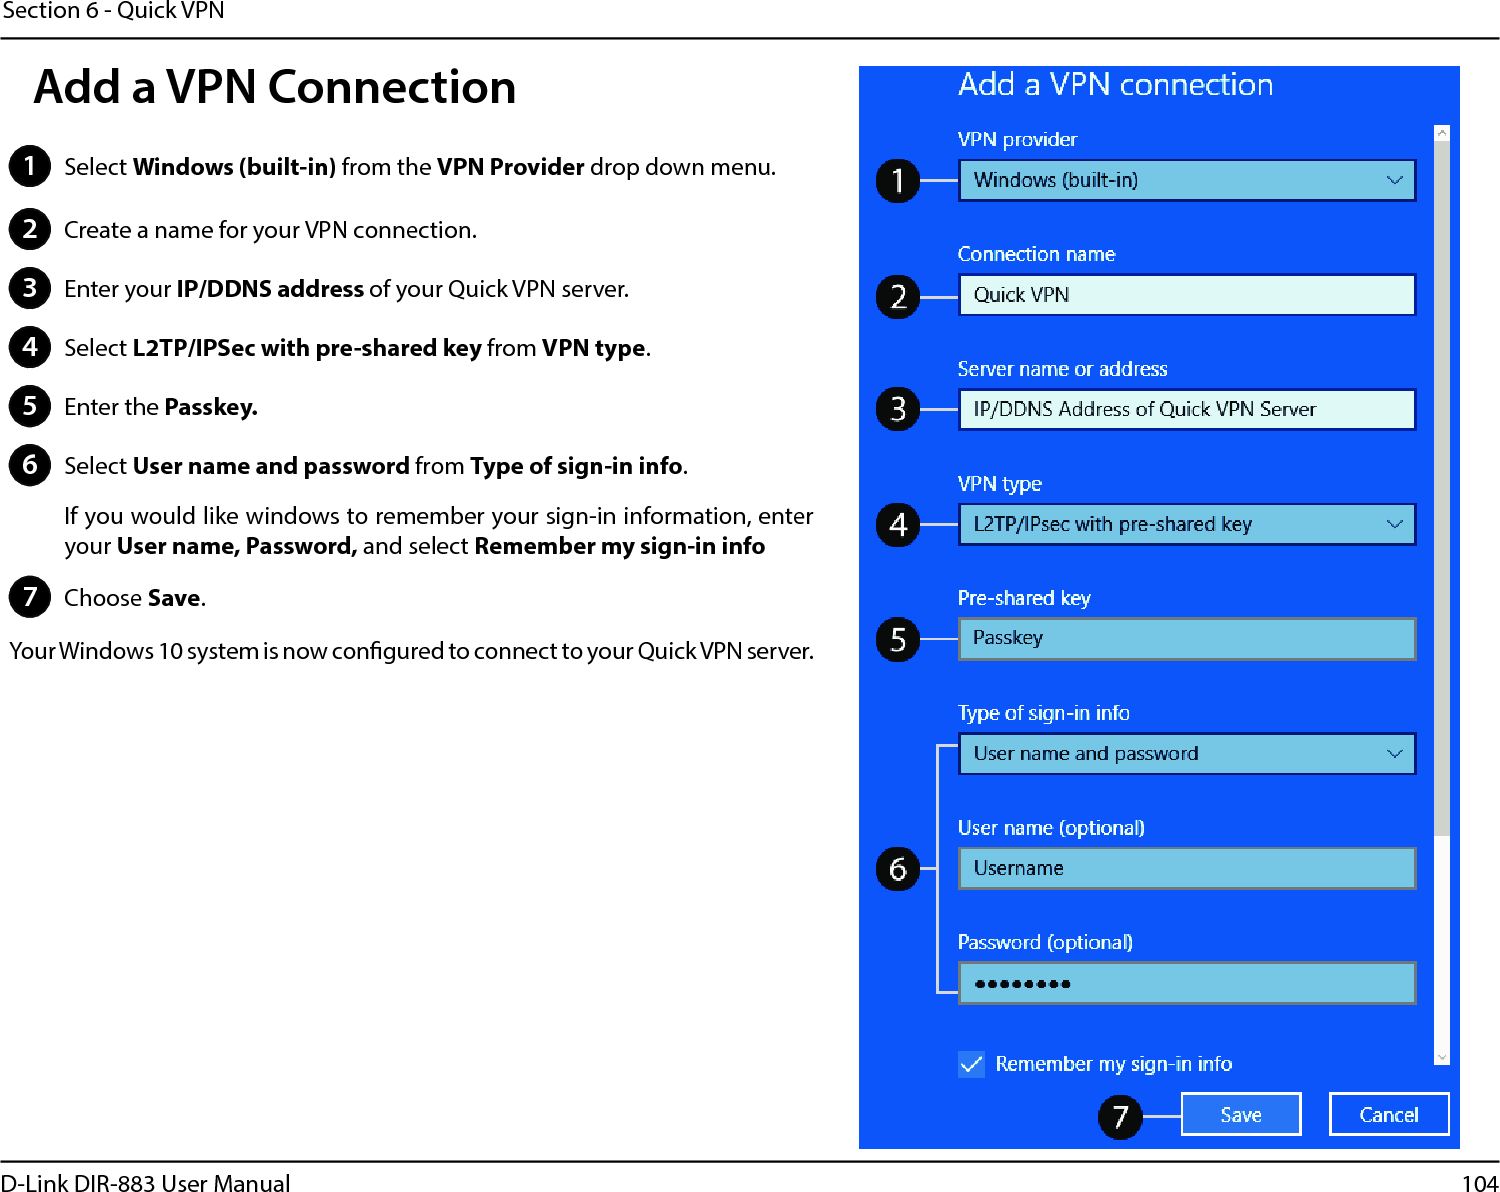 104D-Link DIR-883 User ManualSection 6 - Quick VPN1Select Windows (built-in) from the VPN Provider drop down menu.2Create a name for your VPN connection.3Enter your IP/DDNS address of your Quick VPN server.4Select L2TP/IPSec with pre-shared key from VPN type.5Enter the Passkey.6Select User name and password from Type of sign-in info.If you would like windows to remember your sign-in information, enter your User name, Password, and select Remember my sign-in info7Choose Save.Your Windows 10 system is now congured to connect to your Quick VPN server.Add a VPN Connection